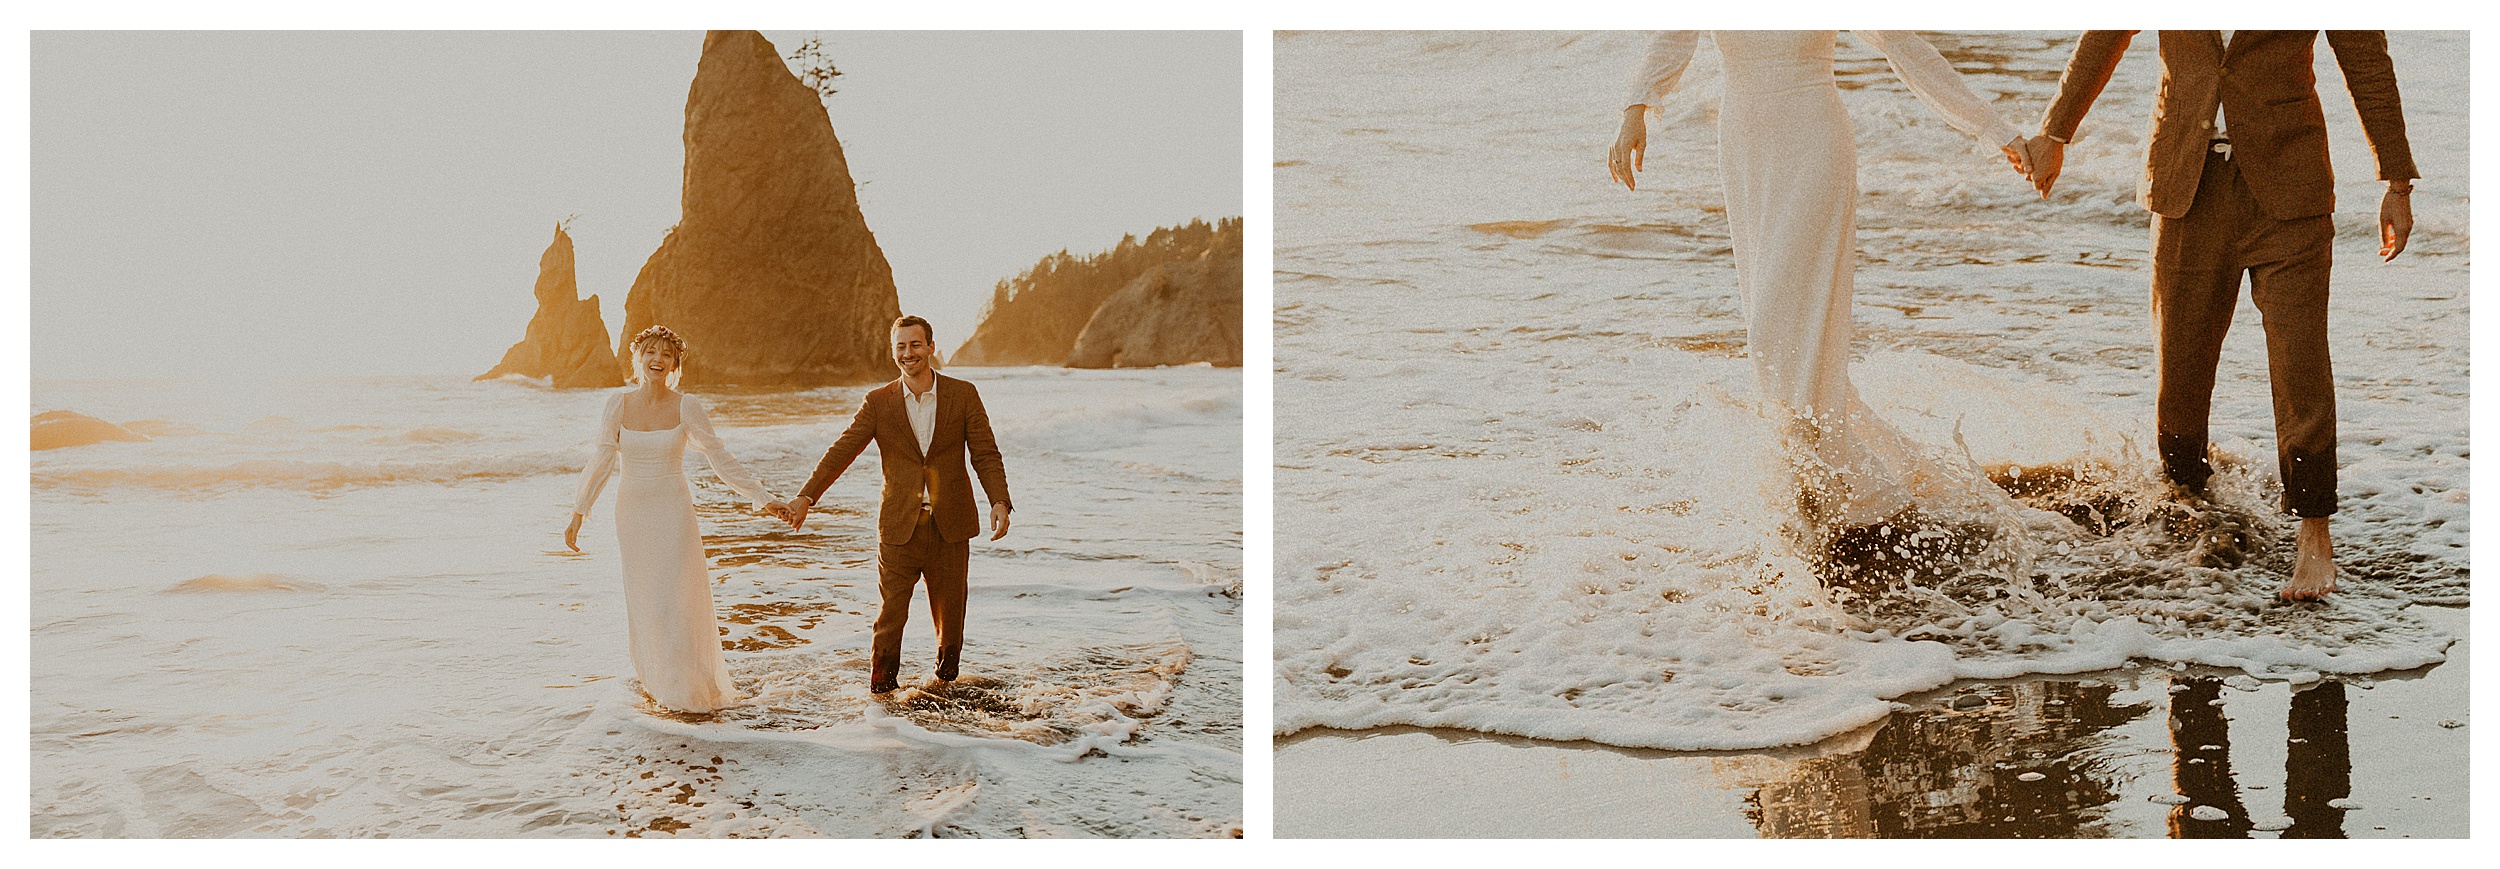 bride and groom walking together rialto beach

